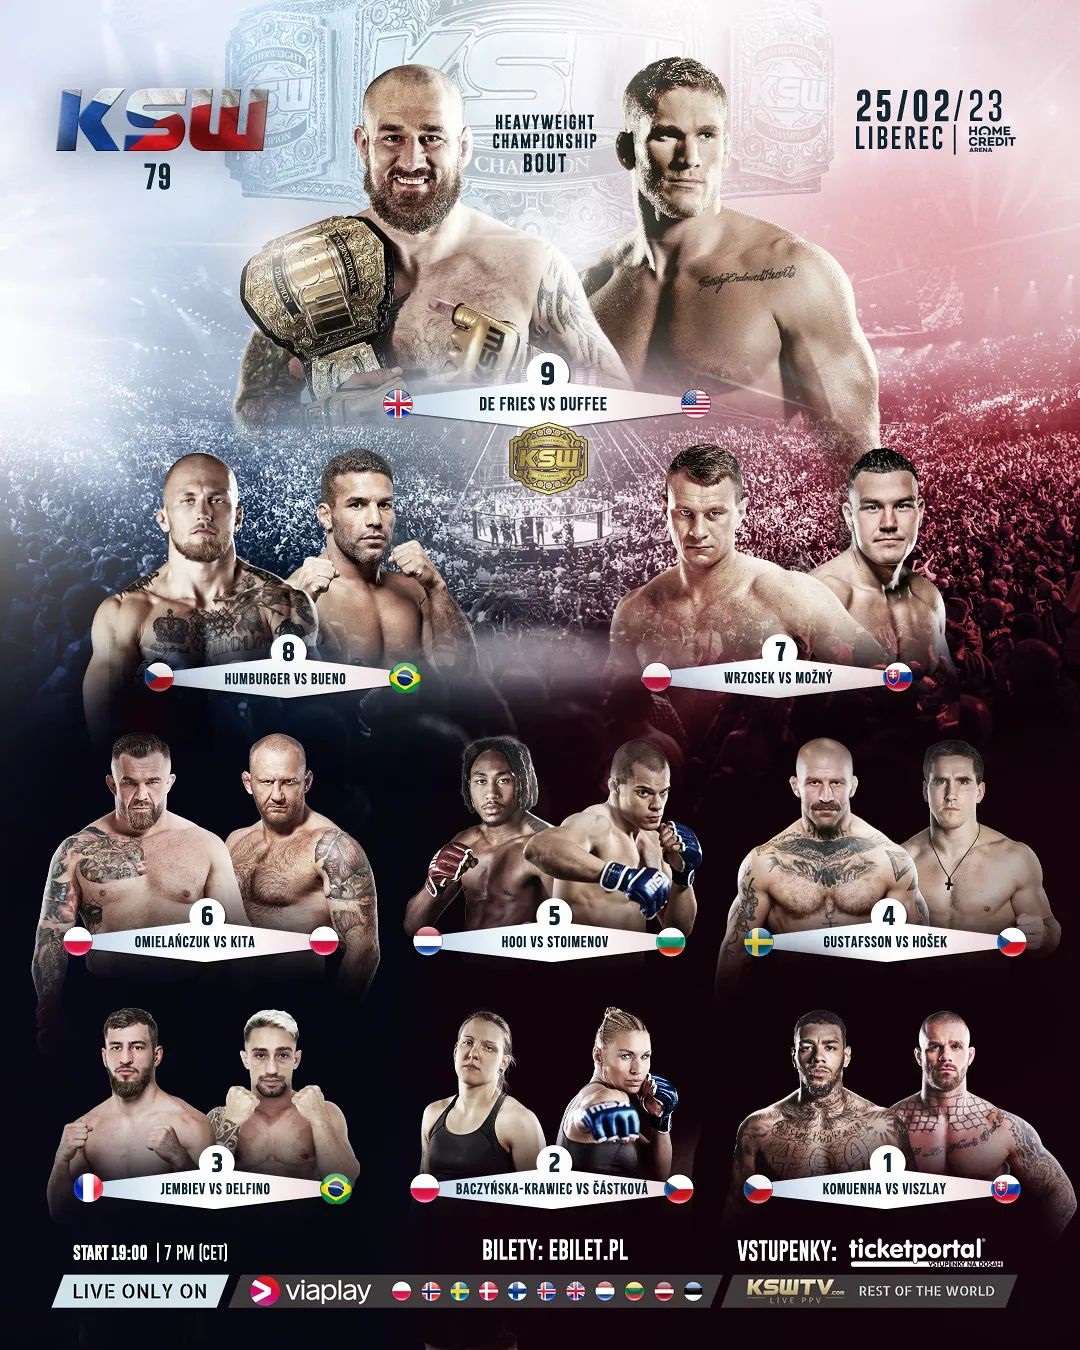 KSW 79 was a mixed martial arts event that took place on Saturday, February 25, 2023 at the Home Credit Arena in Liberec, Czech Republic.